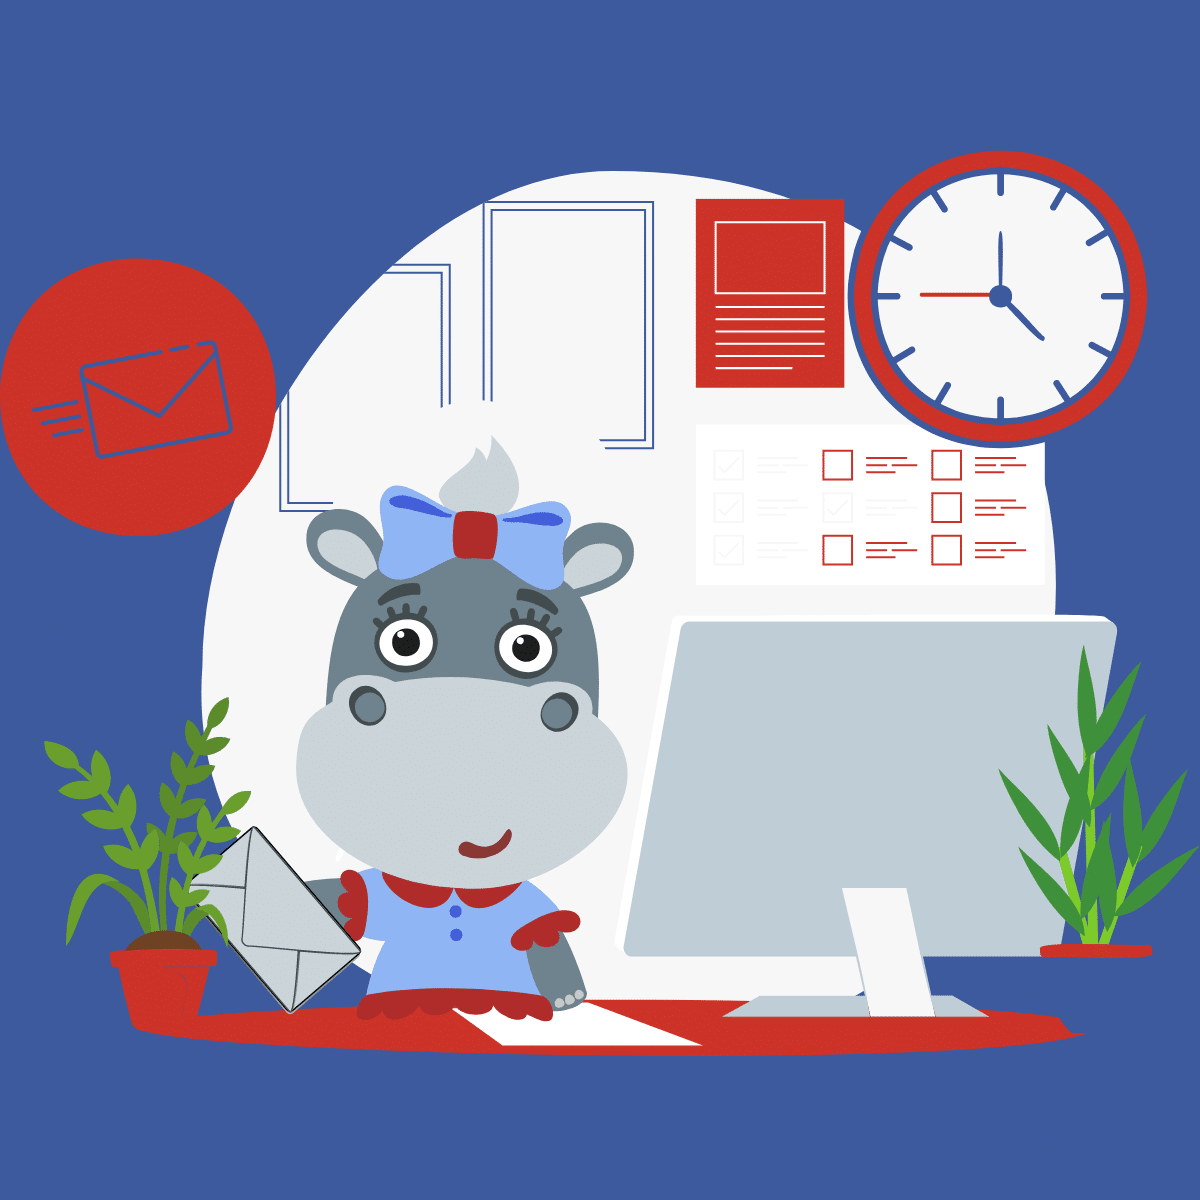 Hippo Pro Email solutions. A happy hippo using our secure email gateway.